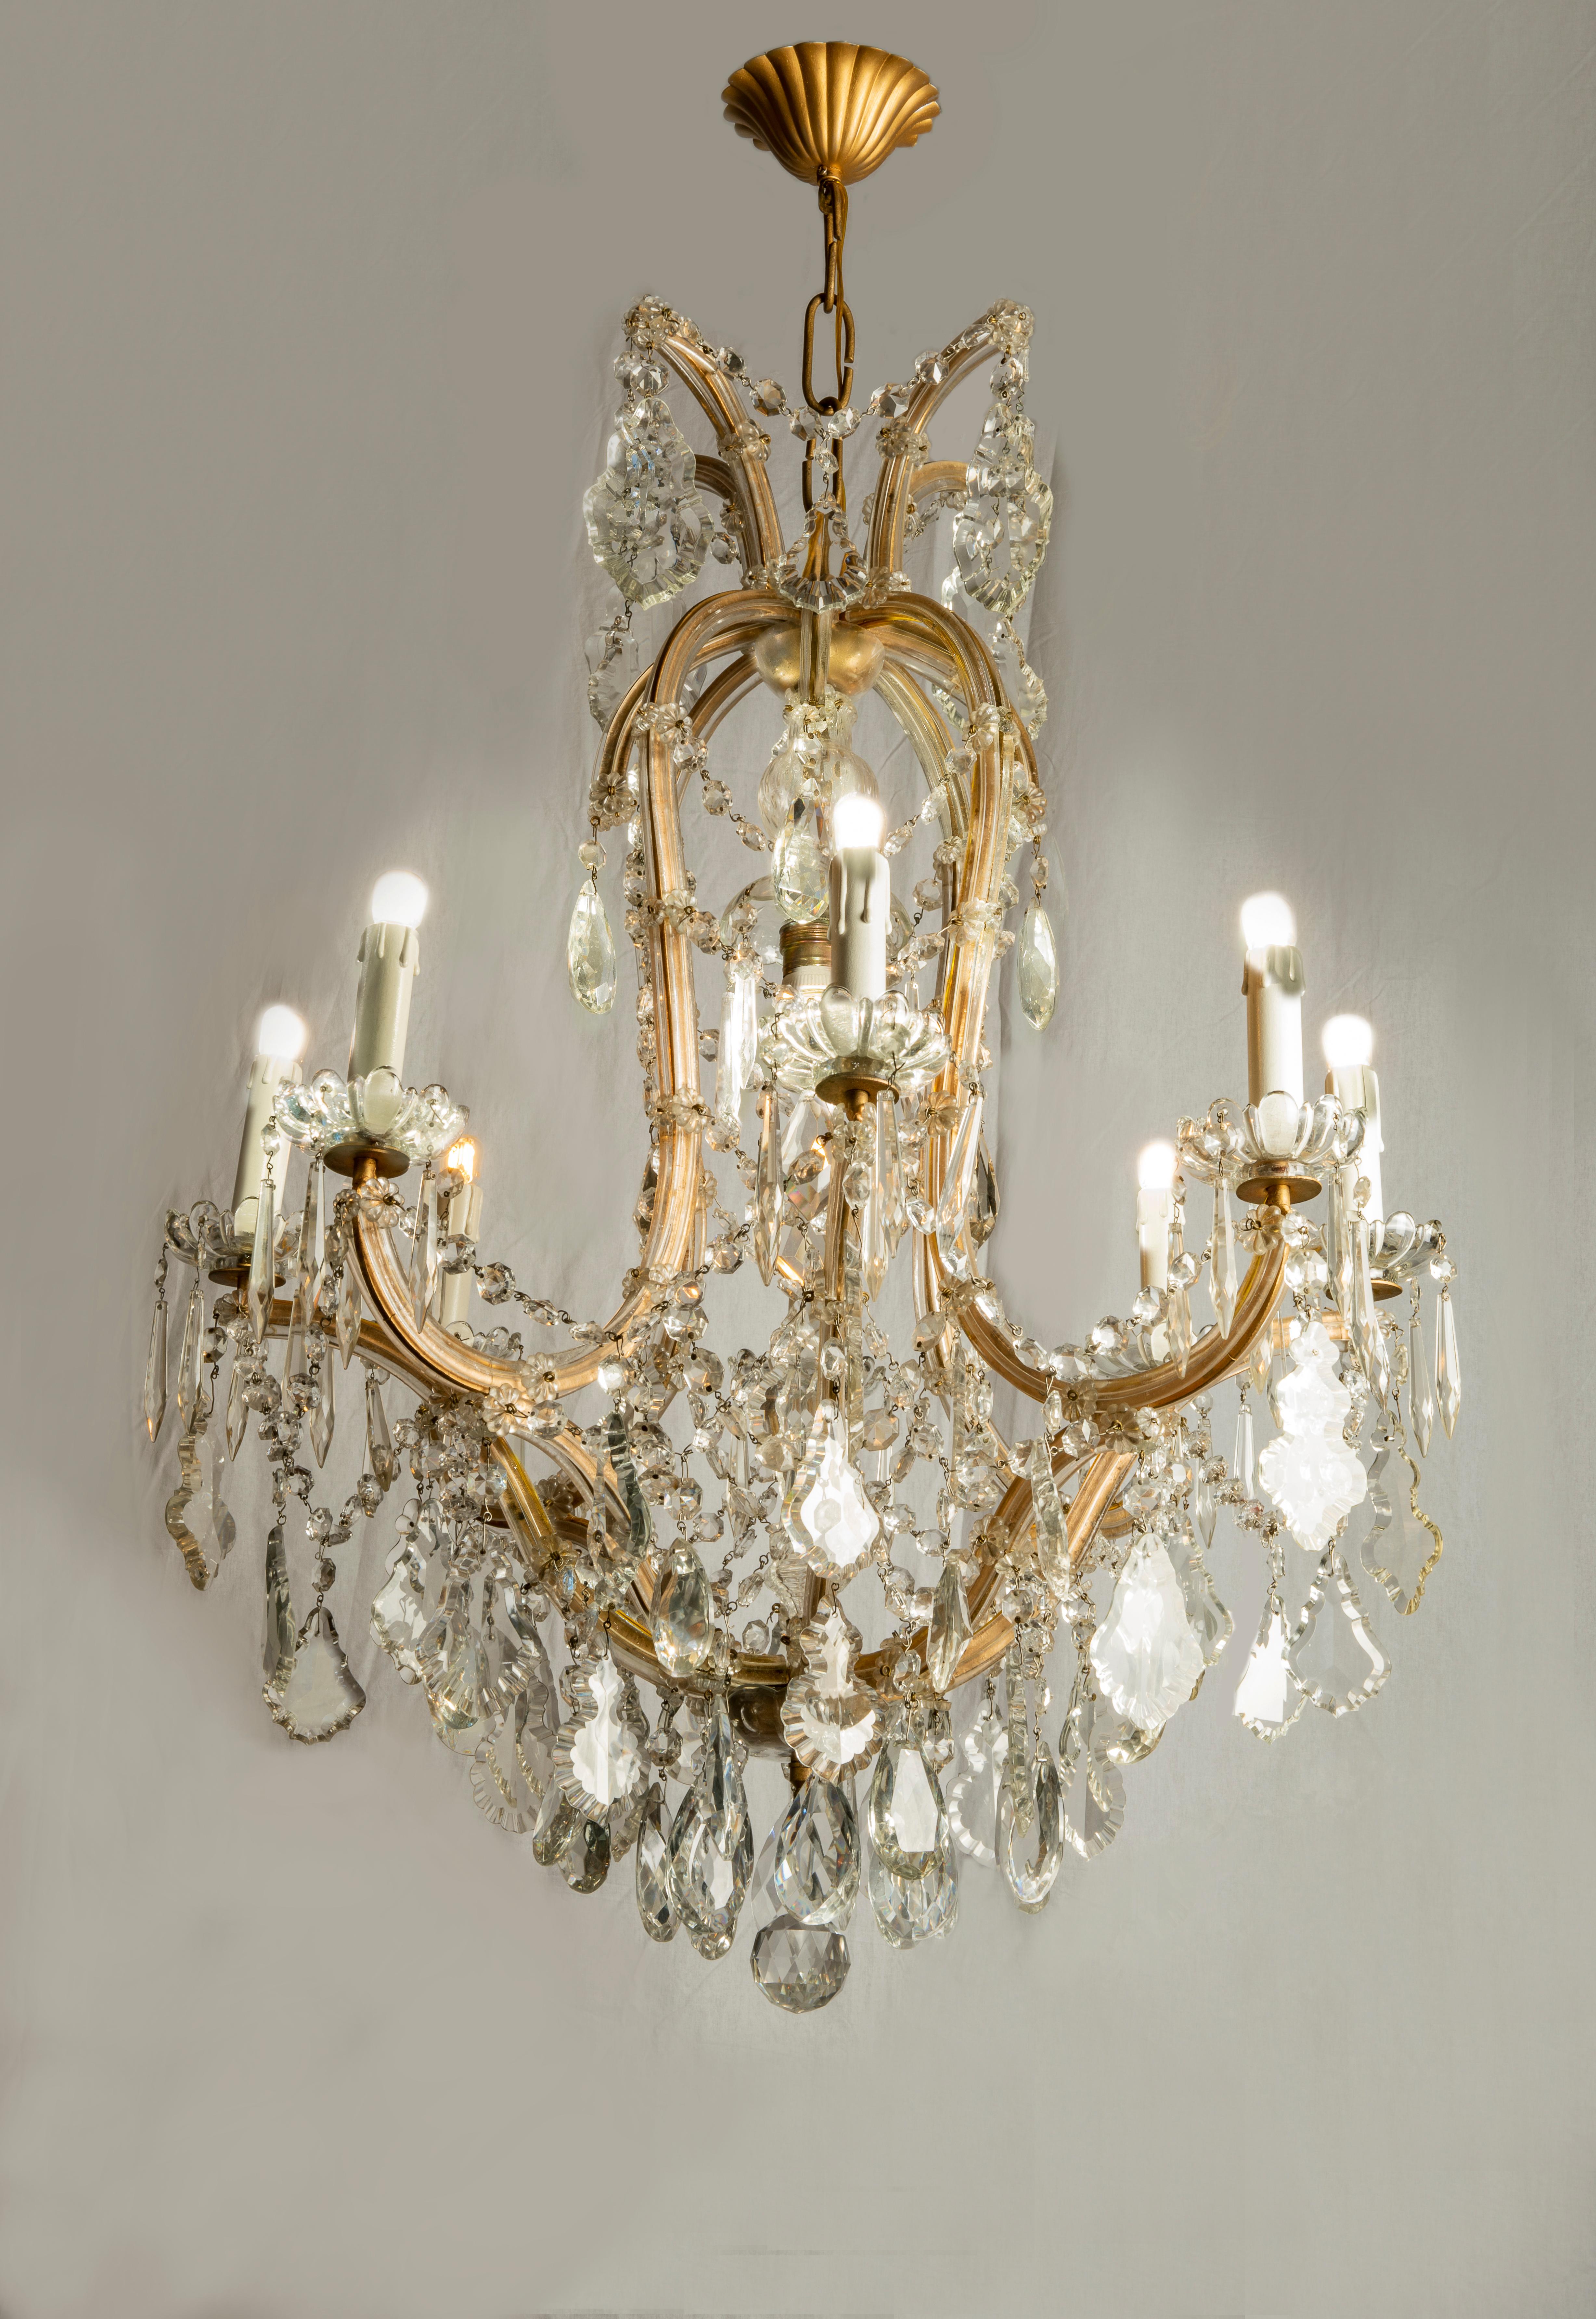 From Italy a Maria Teresa crystal chandelier fully arranged with crystal chains and drops. A  crystal nine-light chandelier with eight curved arms and one extra bulb in the upper centre of the structure. Perfect condition. New wiring for Italian